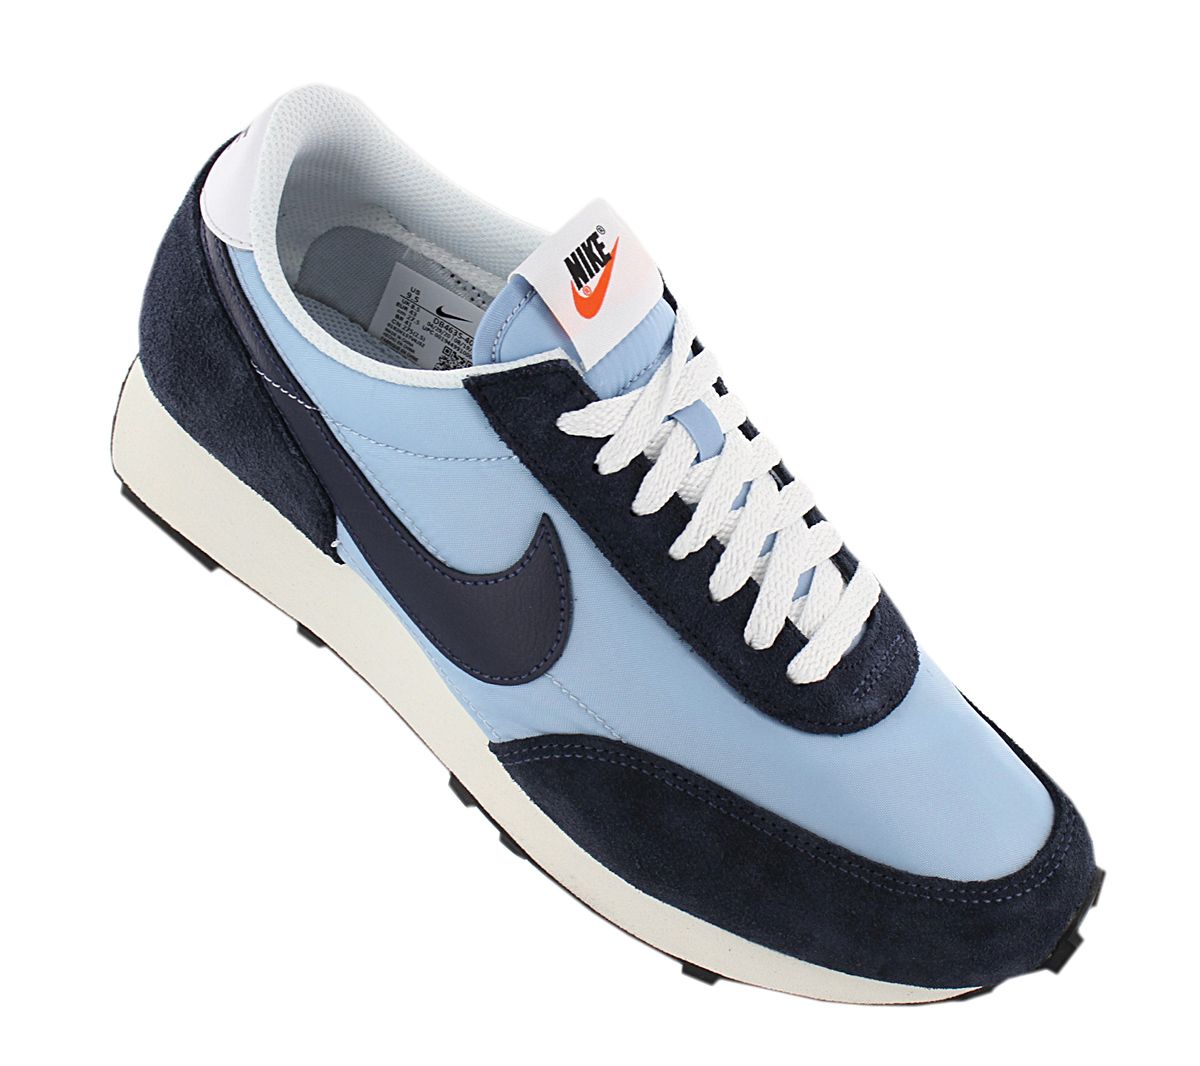 Nike Daybreak Mens Trainer Blue DB4635-400 Casual Retro Shoes Trainers ...